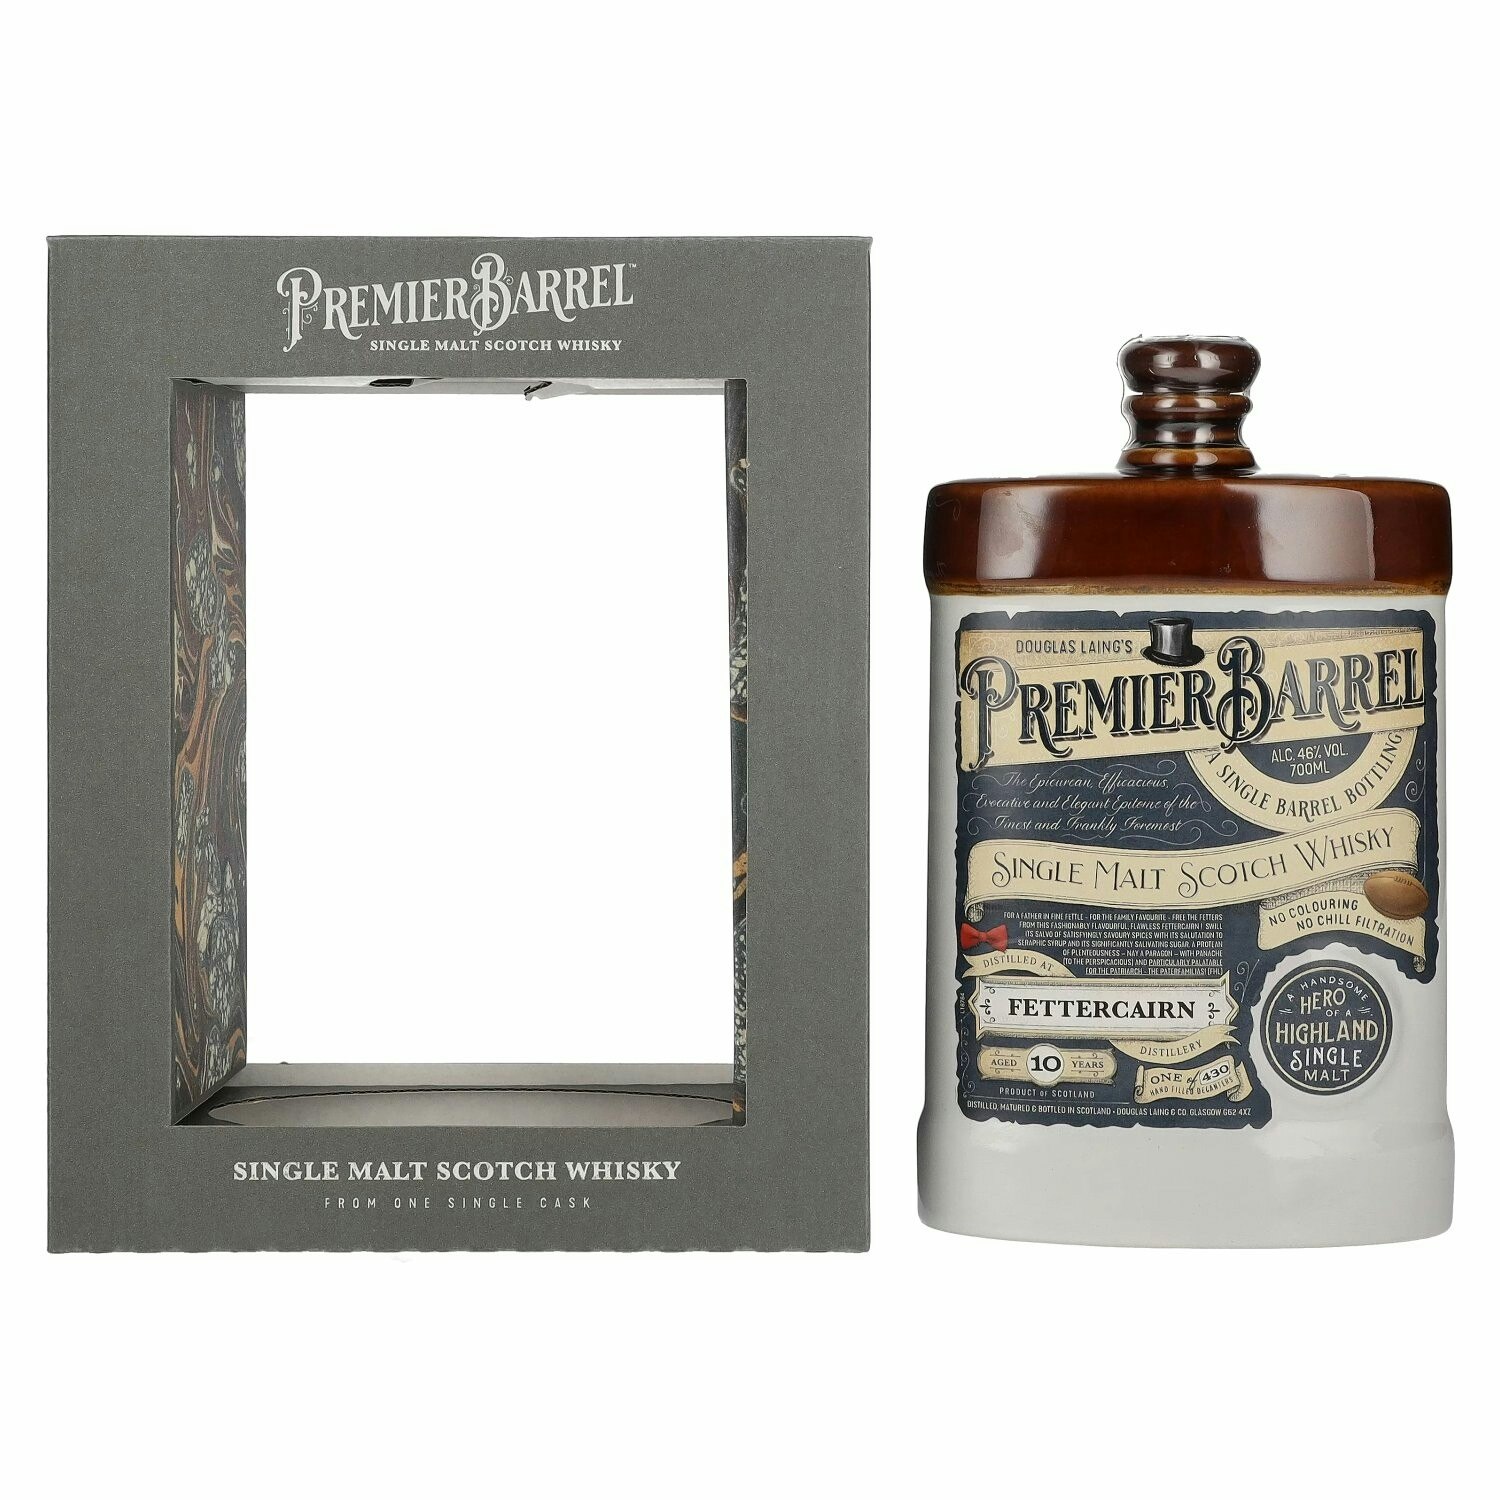 Douglas Laing PREMIER BARREL Fettercairn 10 Years FATHER'S DAY 46% Vol. 0,7l in Giftbox